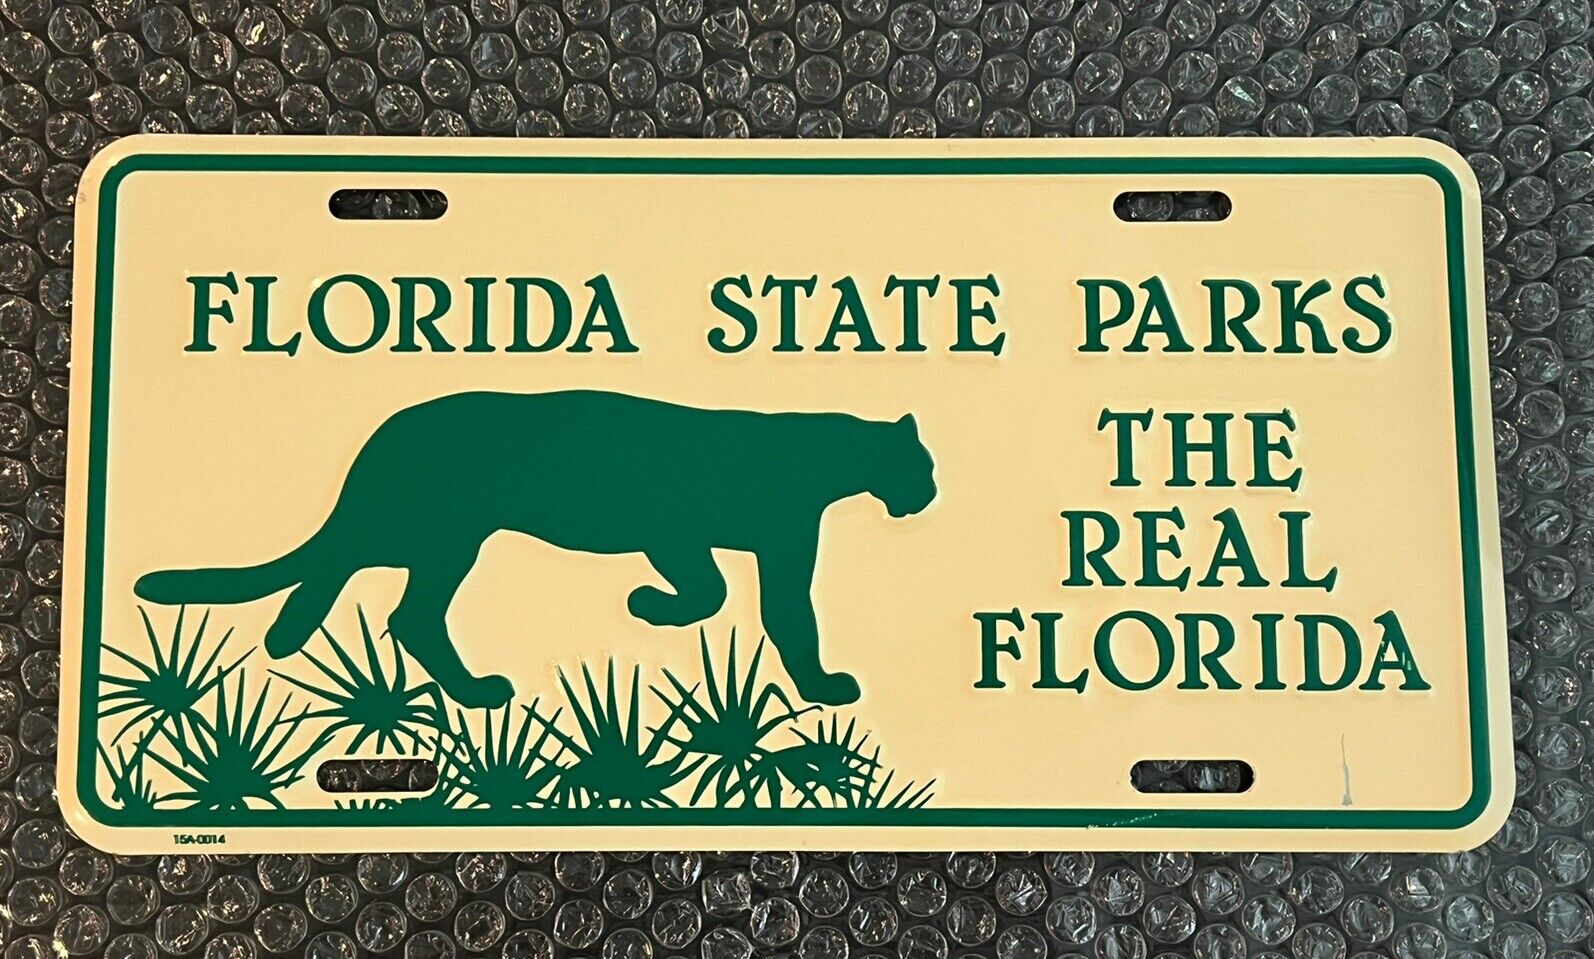 FLORIDA STATE PARKS License Plate 2015 “The Real Florida” Fort Beach Coast Camp